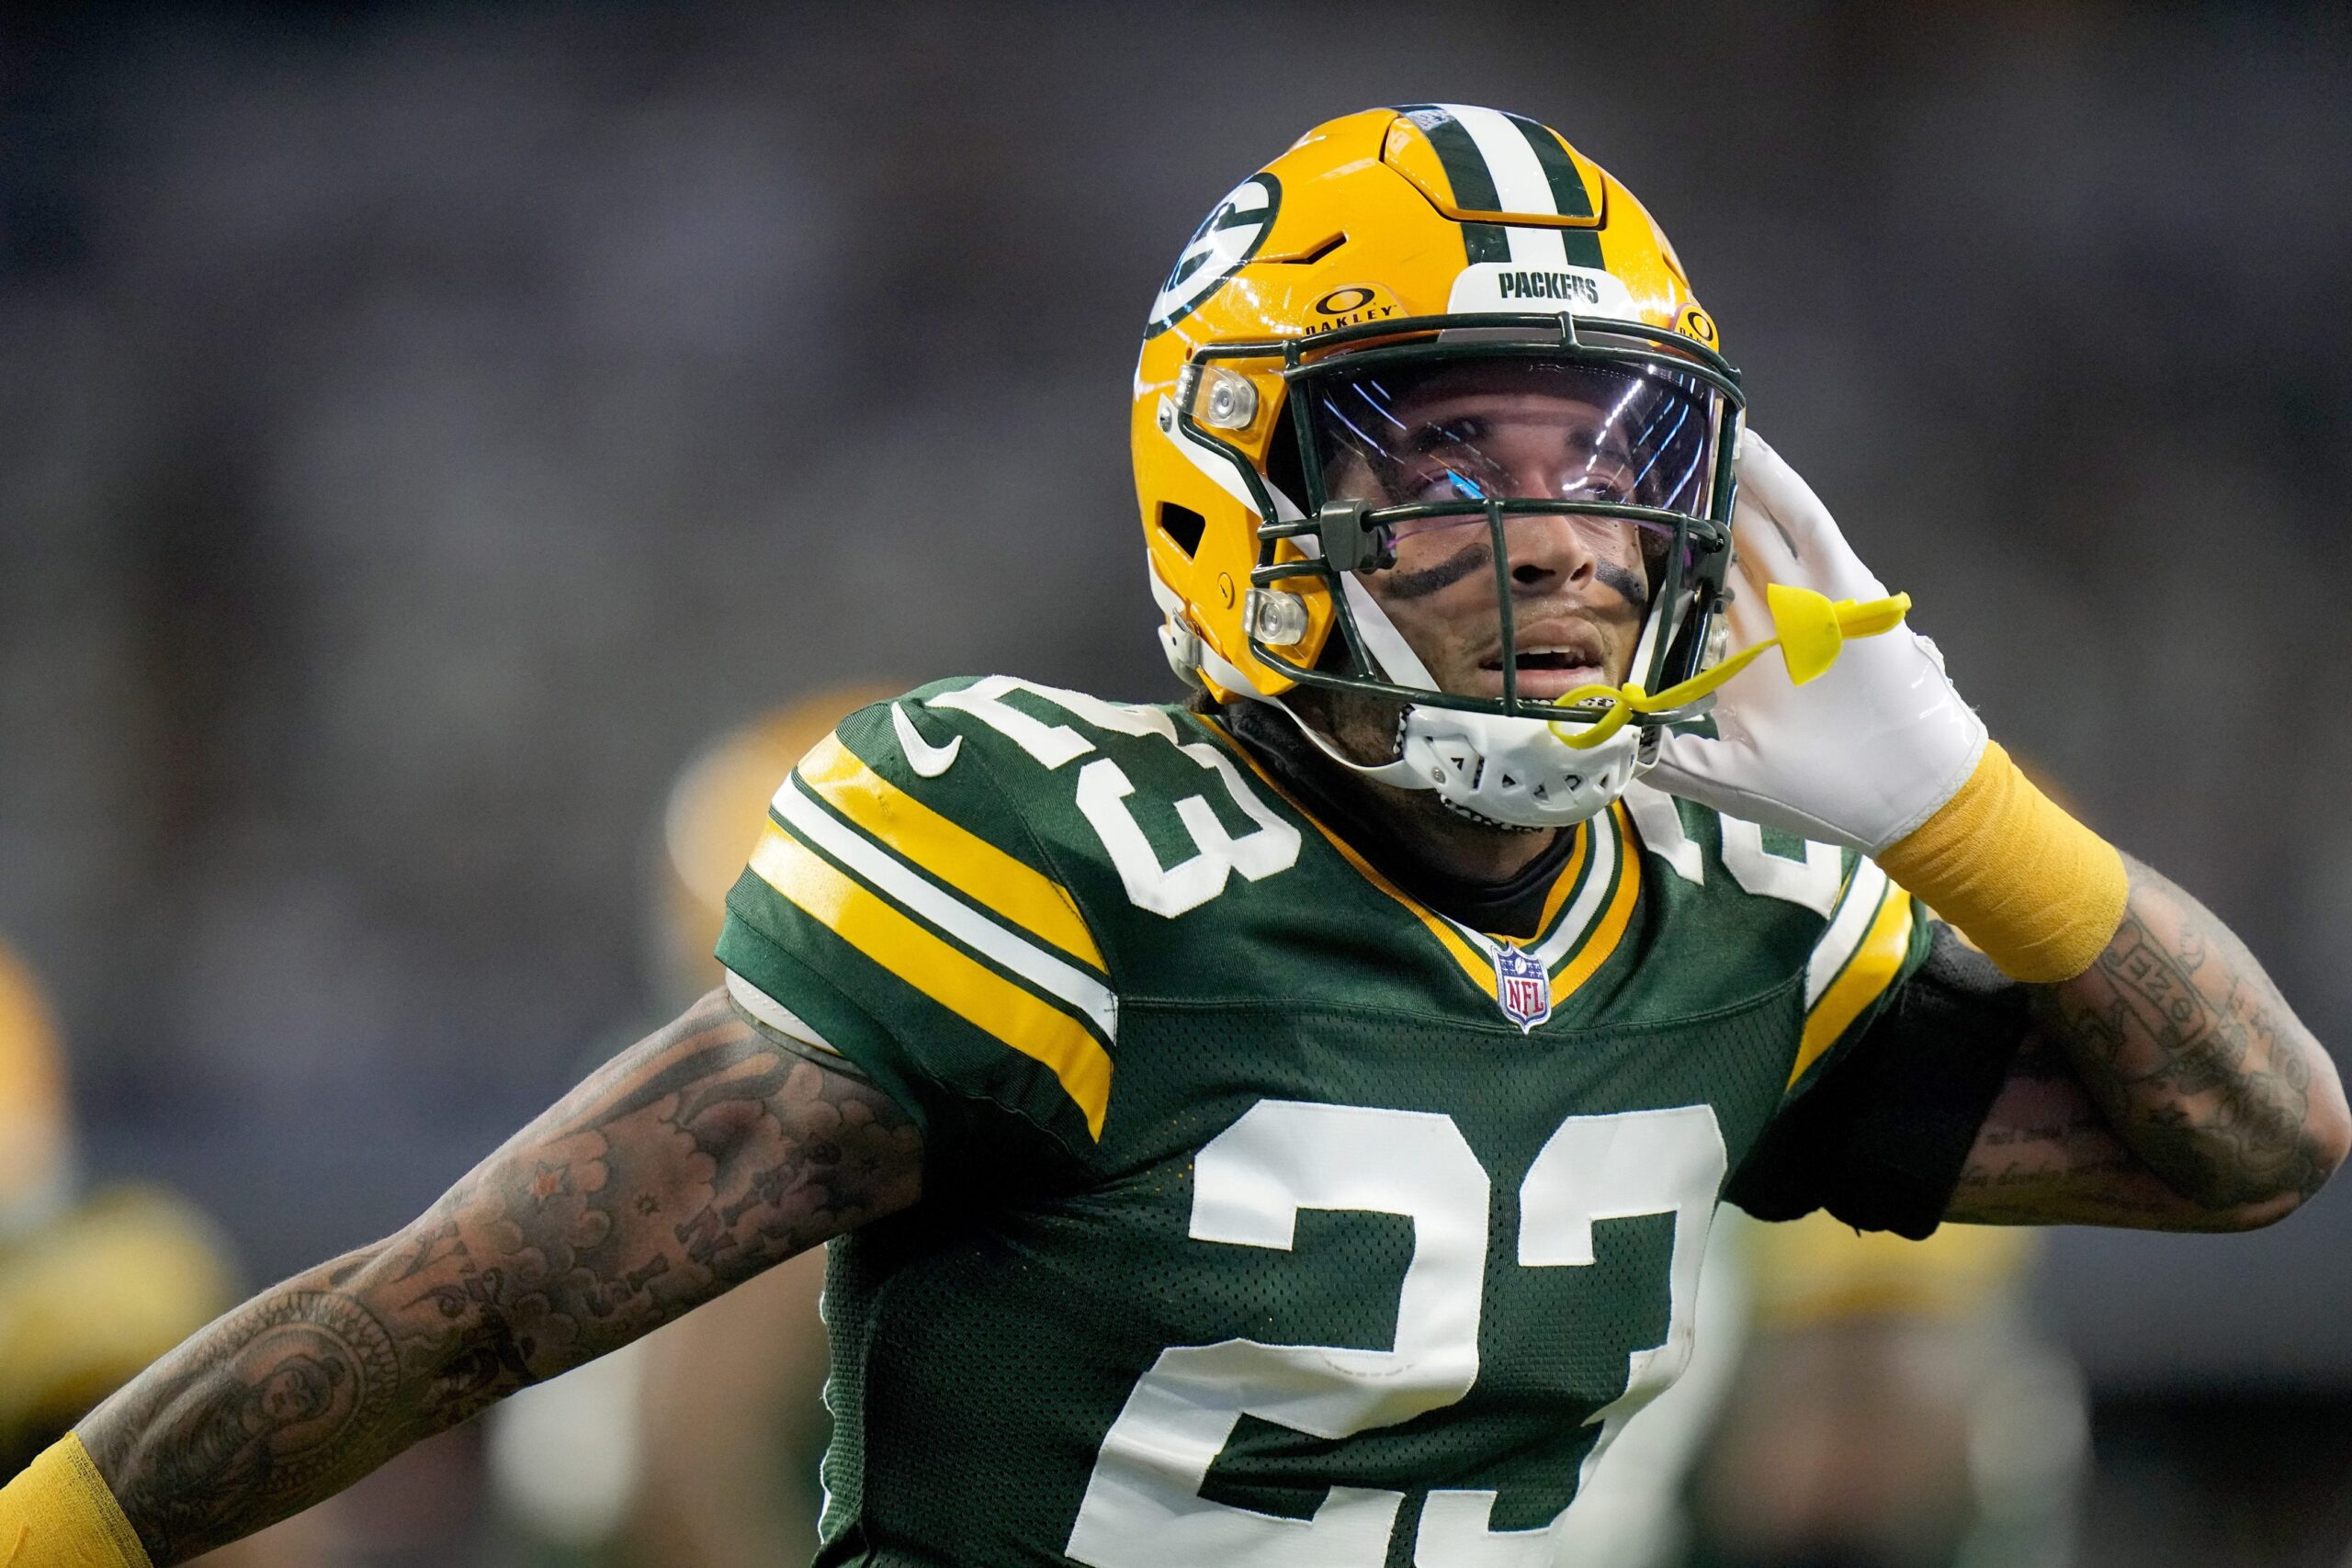 Green Bay Packers cornerback Jaire Alexander celebrates after a play